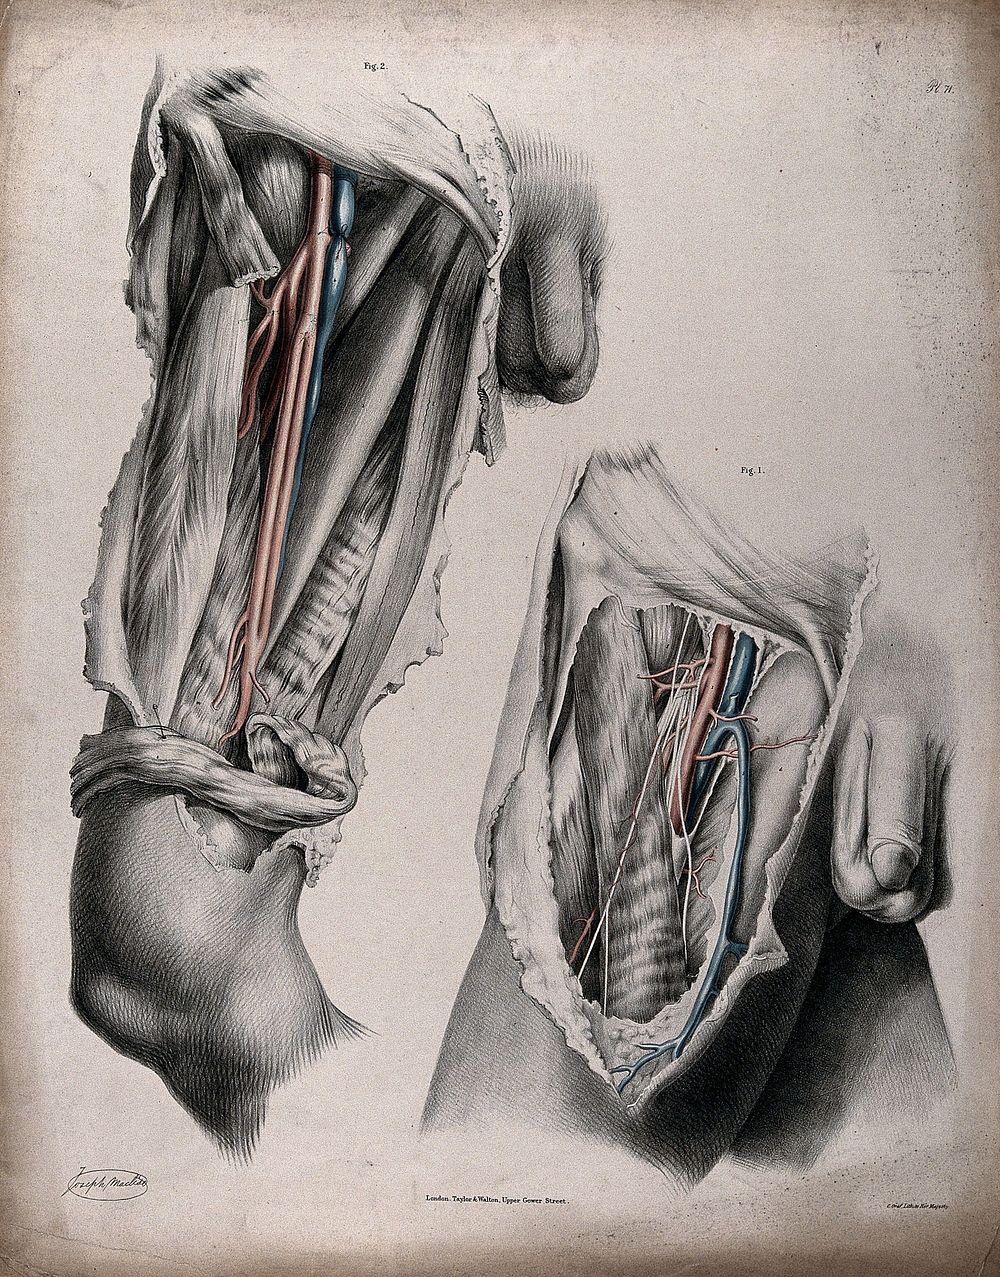 The circulatory system: dissections of the thigh and groin of a man, with the arteries and veins indicated in red and blue.…